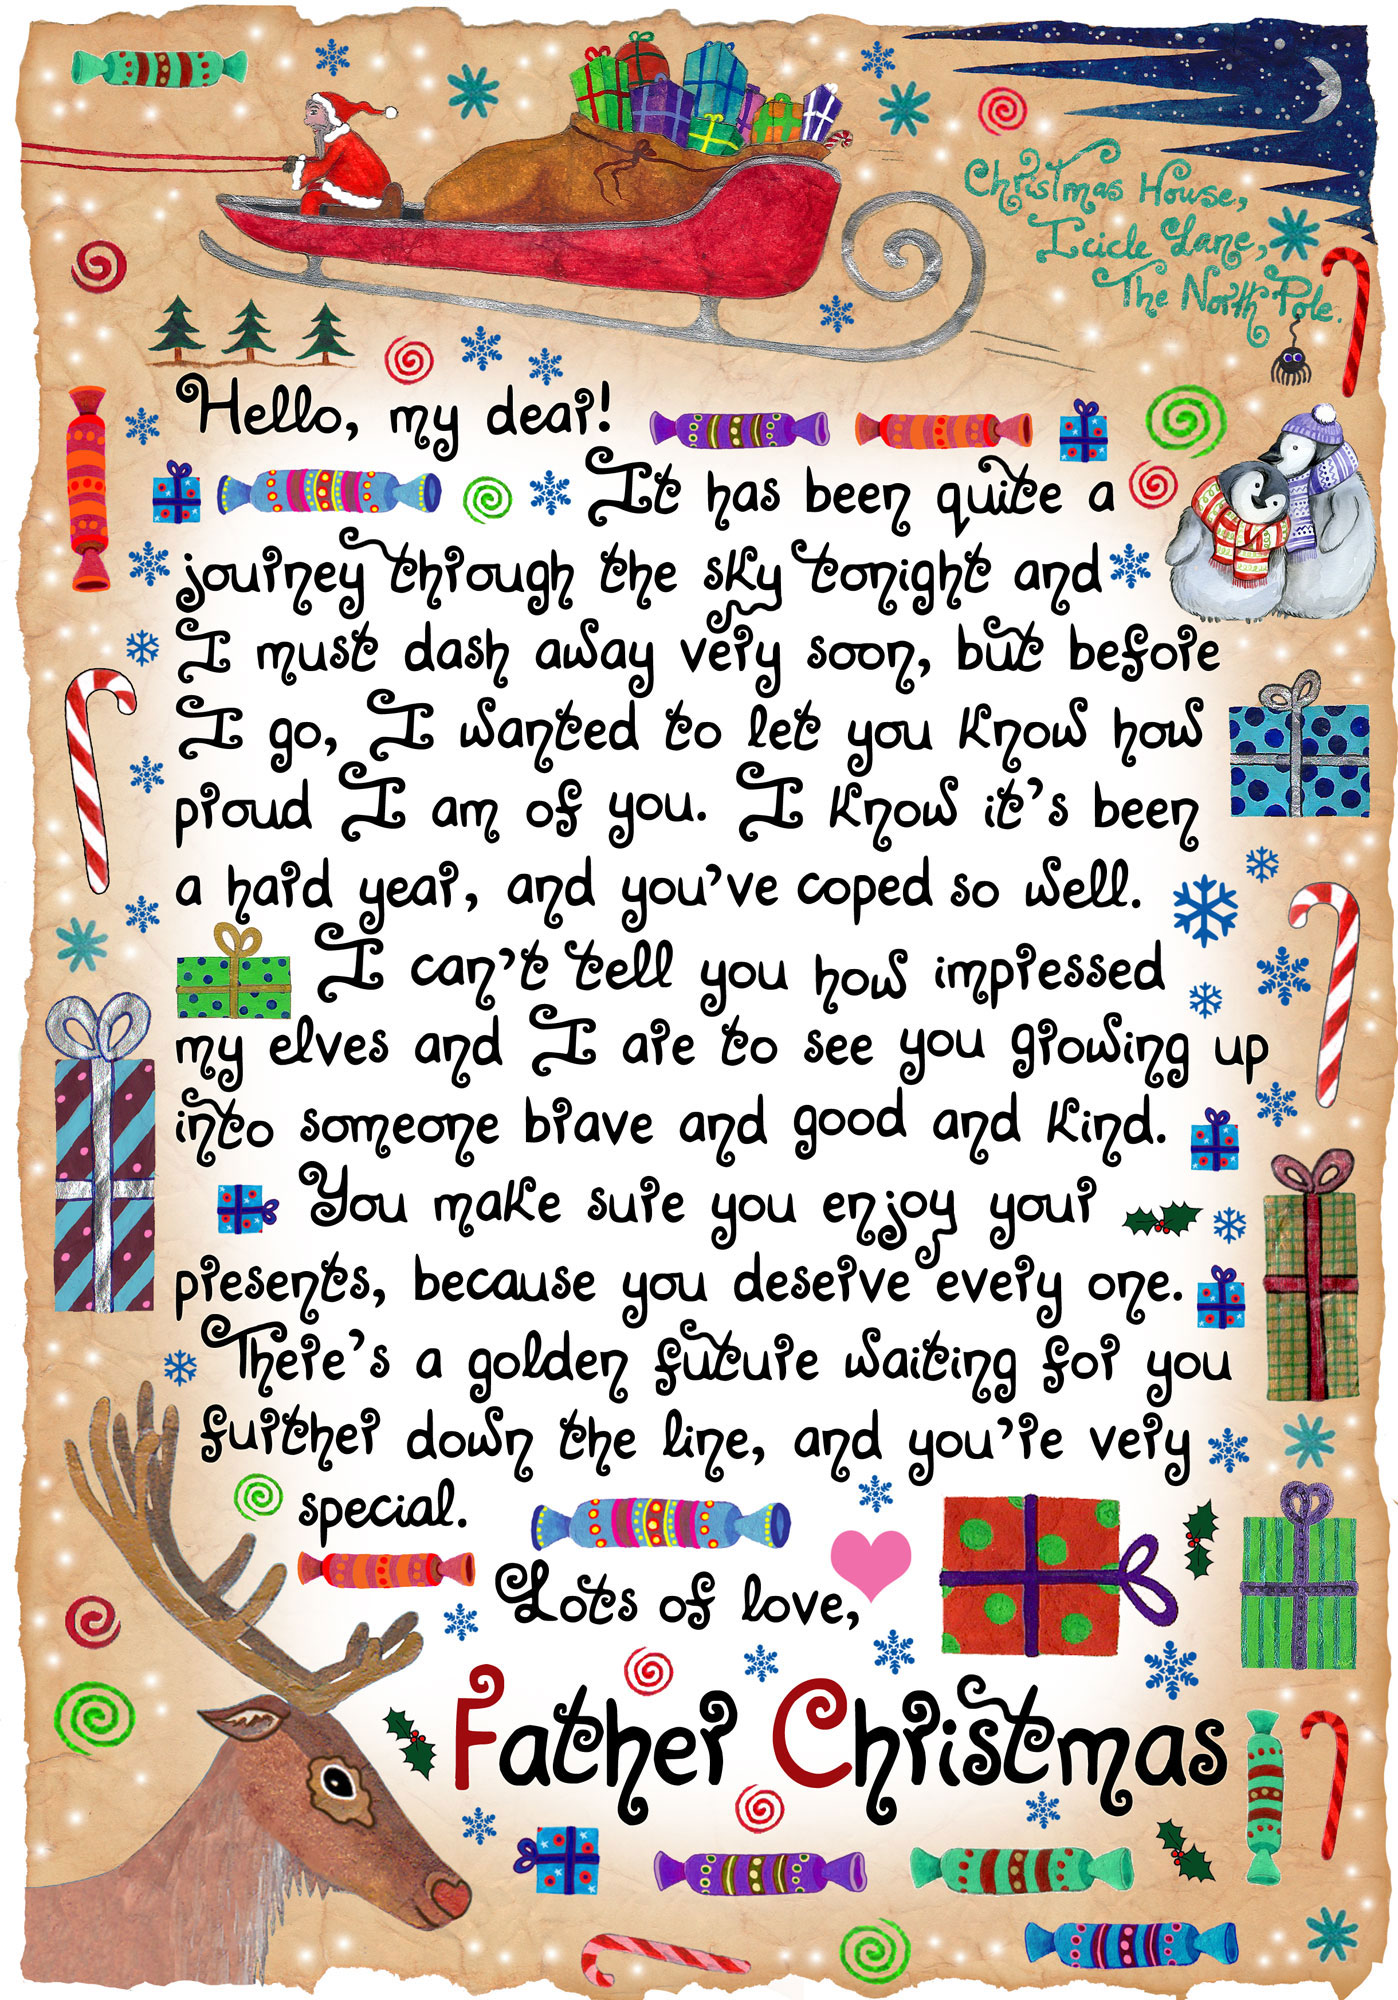 Printable letter from Santa to read on Christmas Morning, for a child who's had a difficult year.